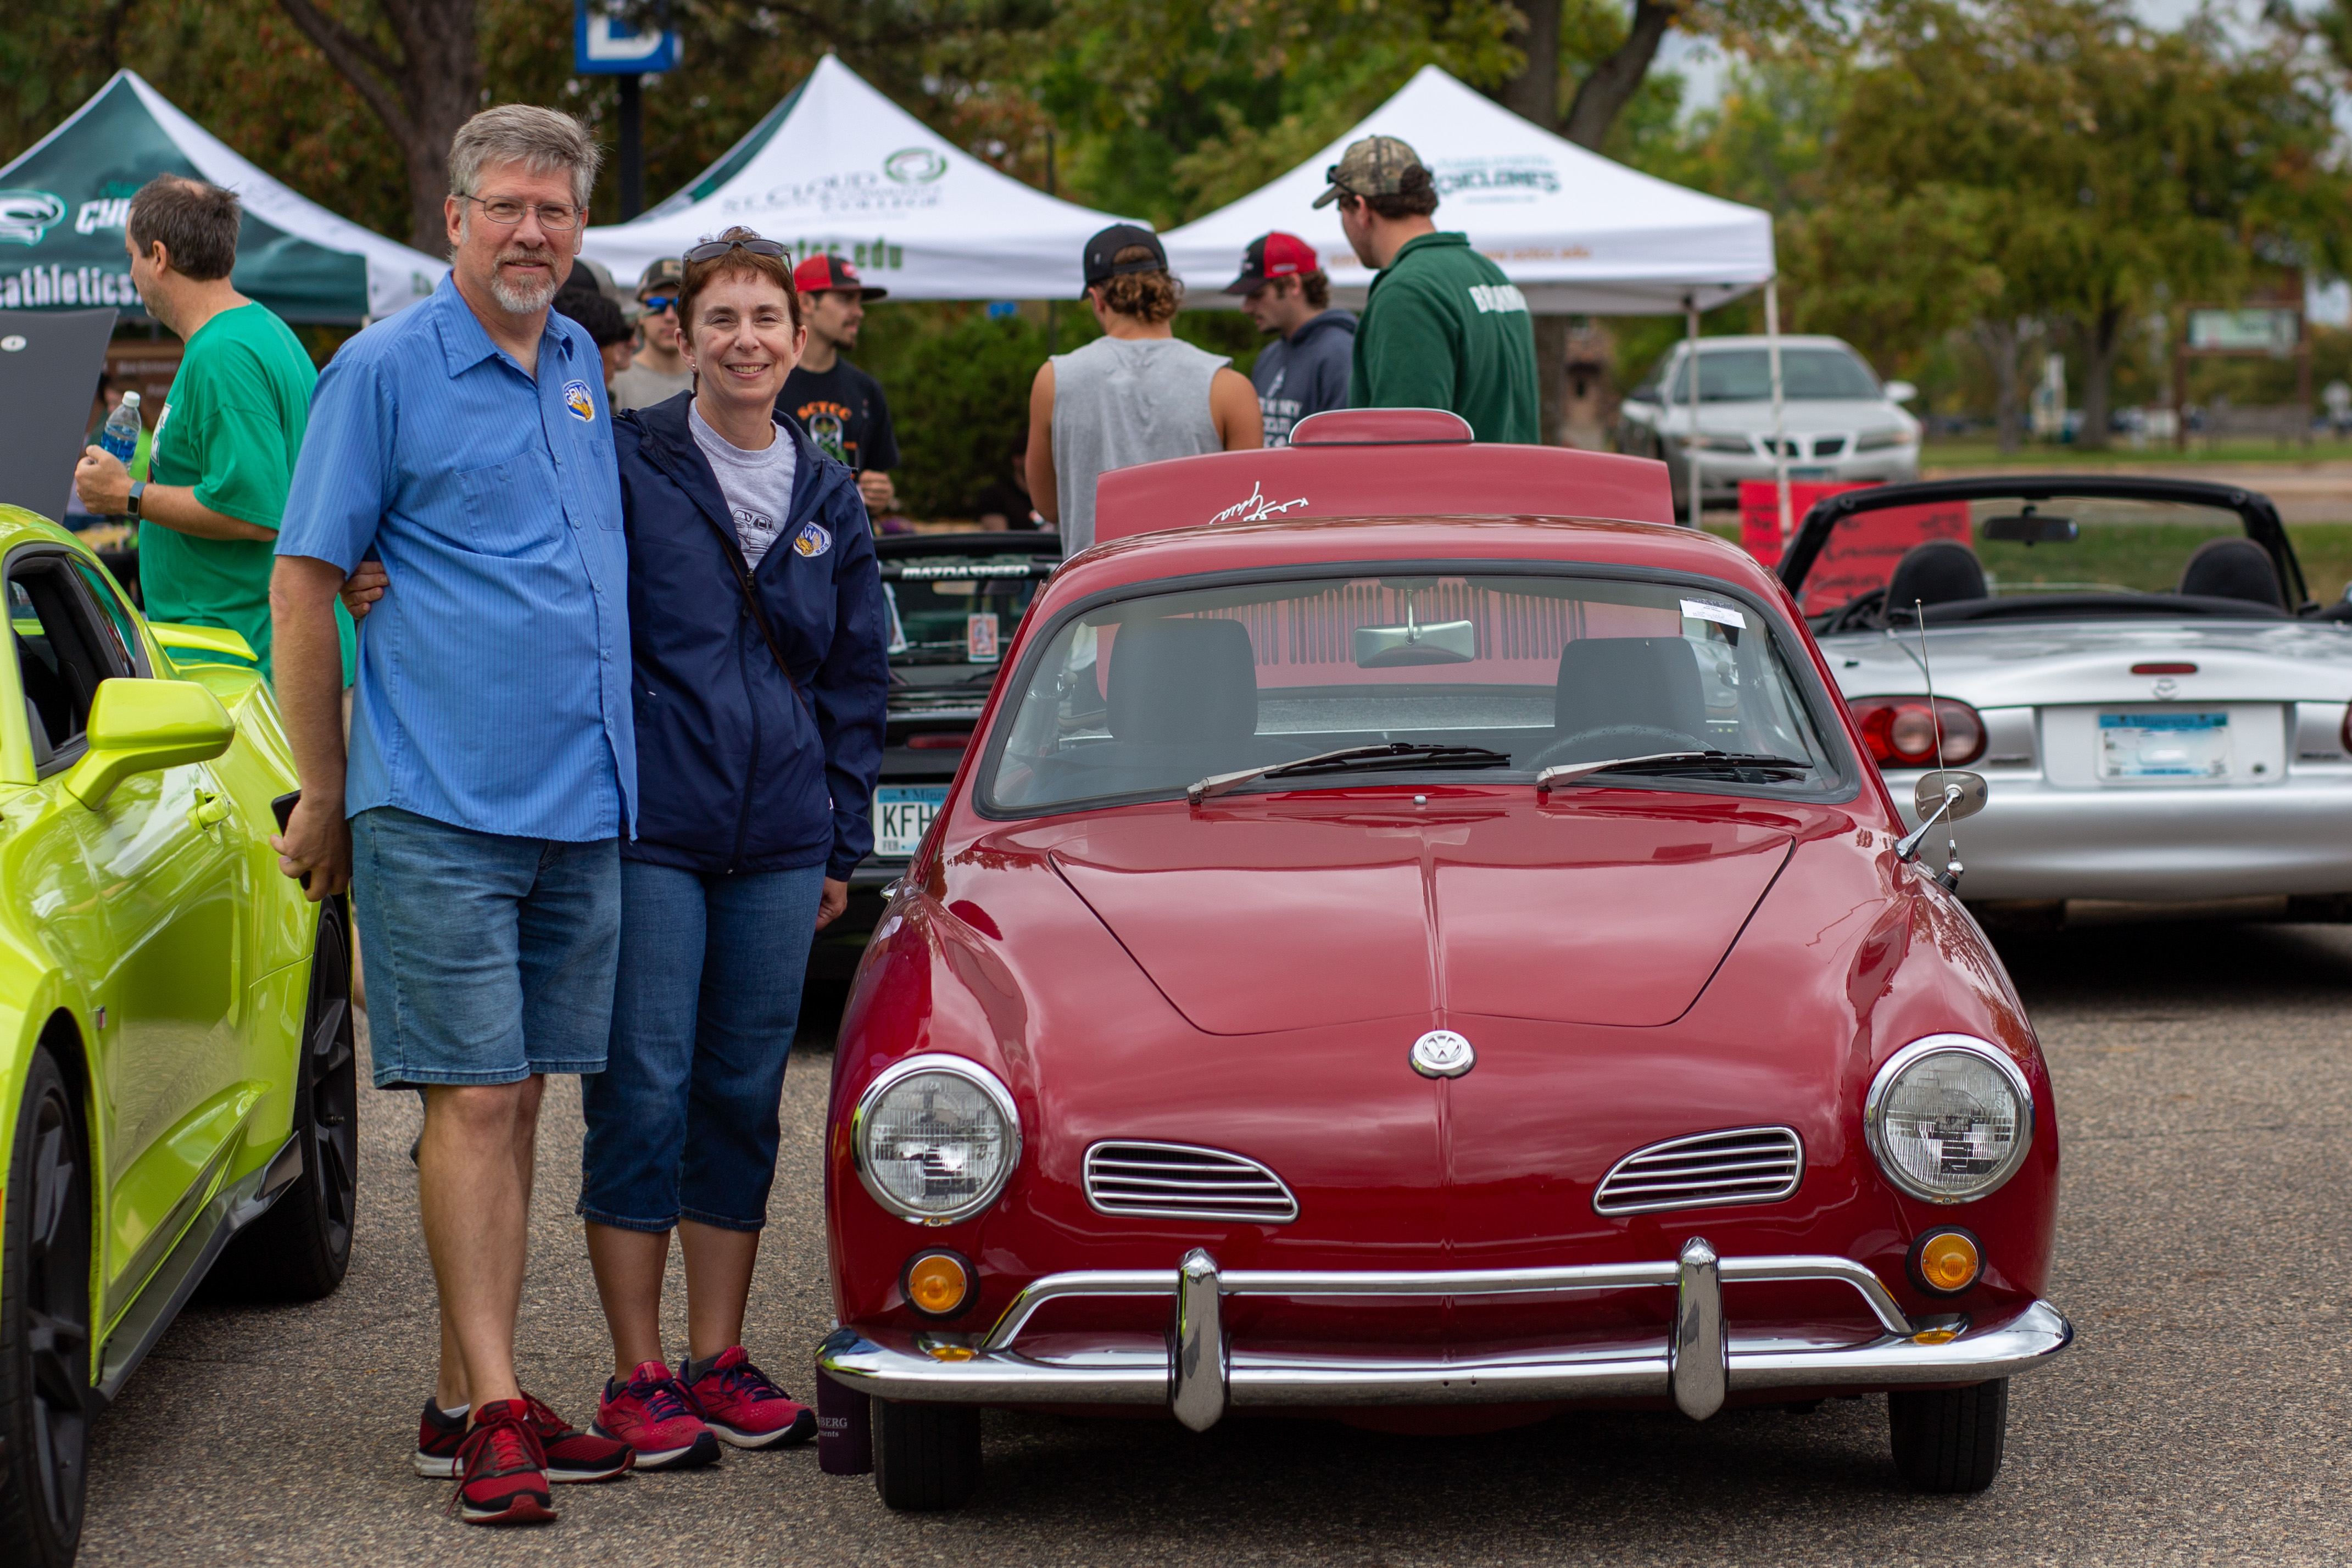 participants standing next to their car